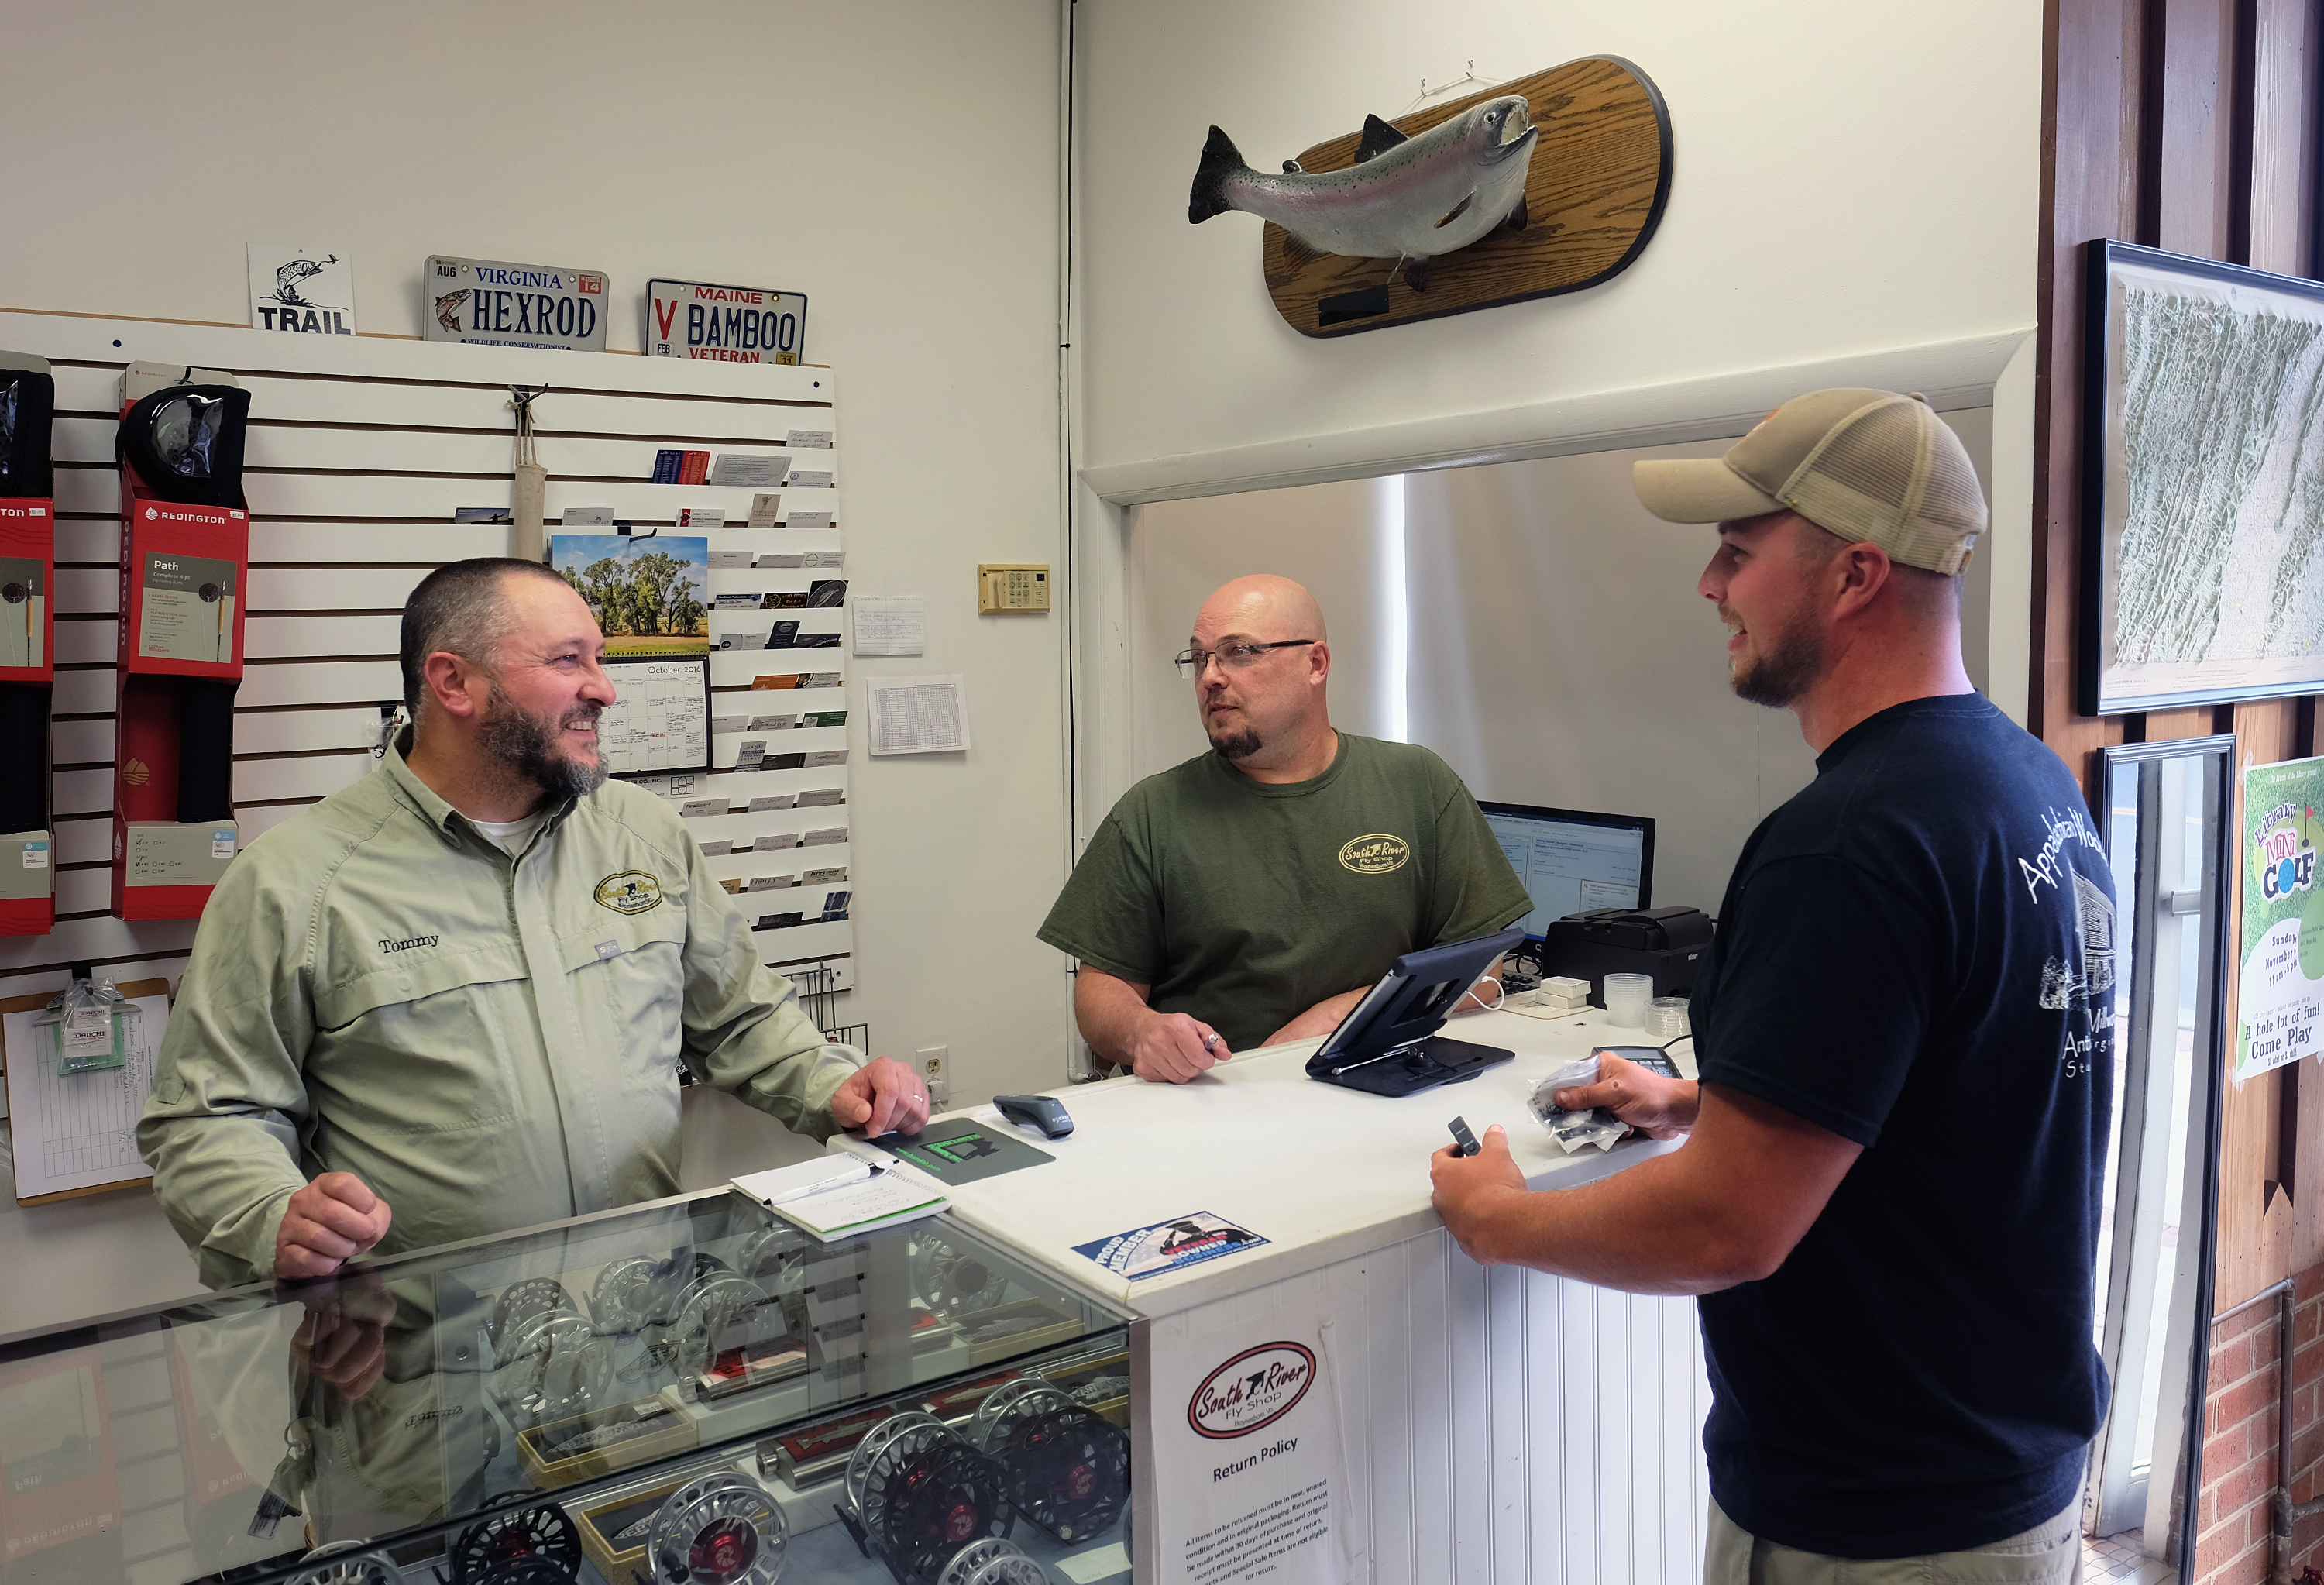 Tommy Lawhorne, and Kevin Little talk with customer Will Walter of Doom, Va. at the South River Fly shop in Waynesboro, Va., Thursday, Oct. 13, 2016. (Photo by Norm Shafer).